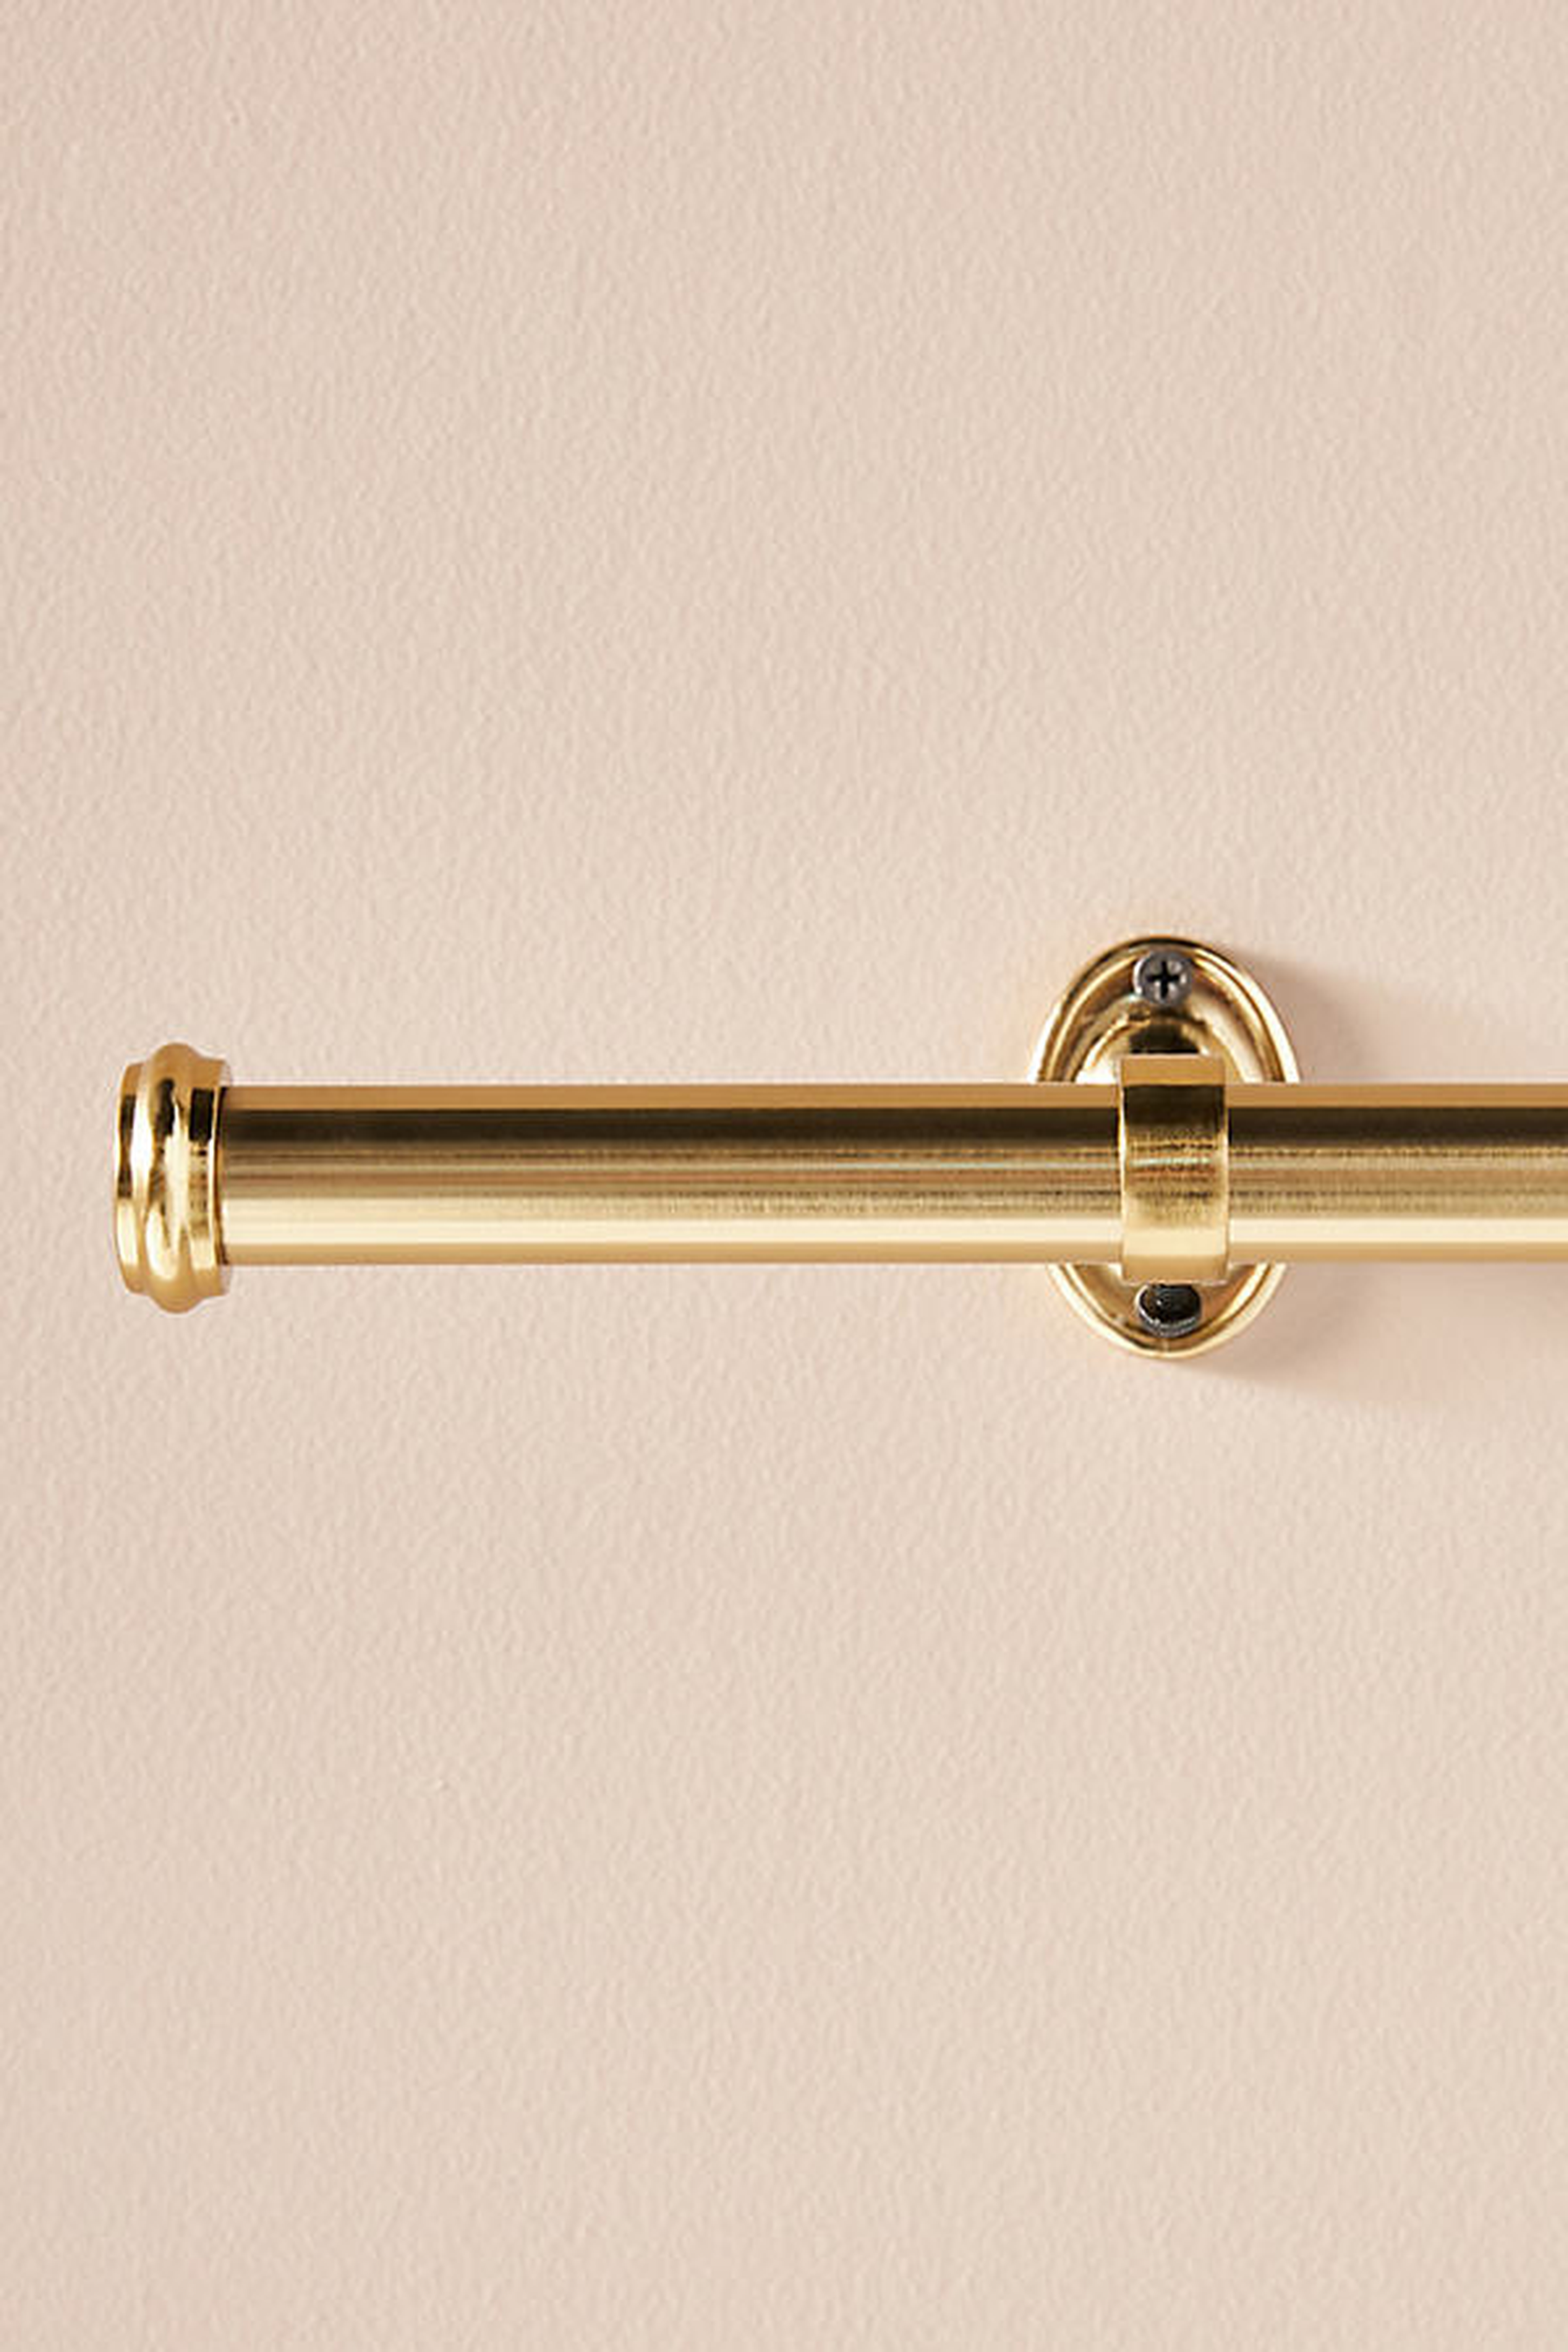 Smithery Curtain Rod By Anthropologie in Gold Size S - Anthropologie